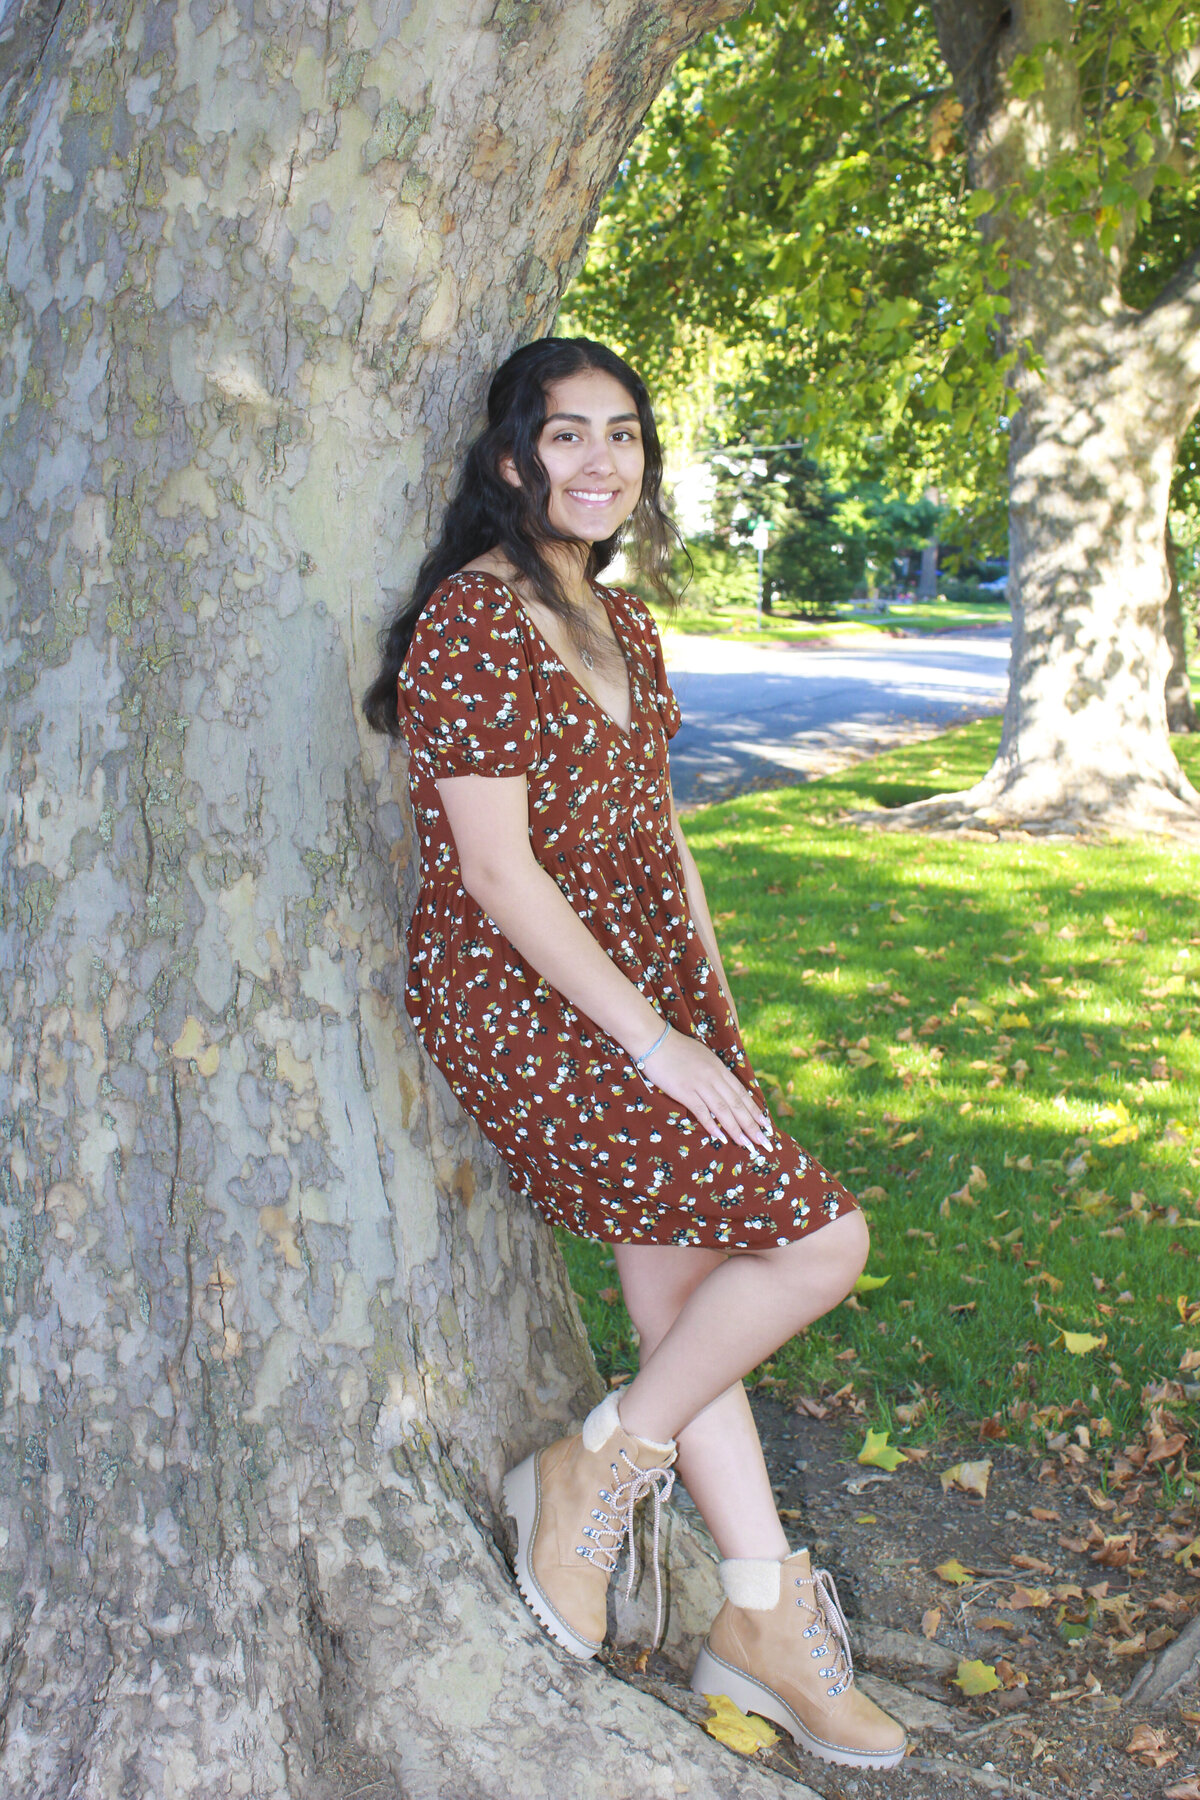 lady leaning on tree smiling